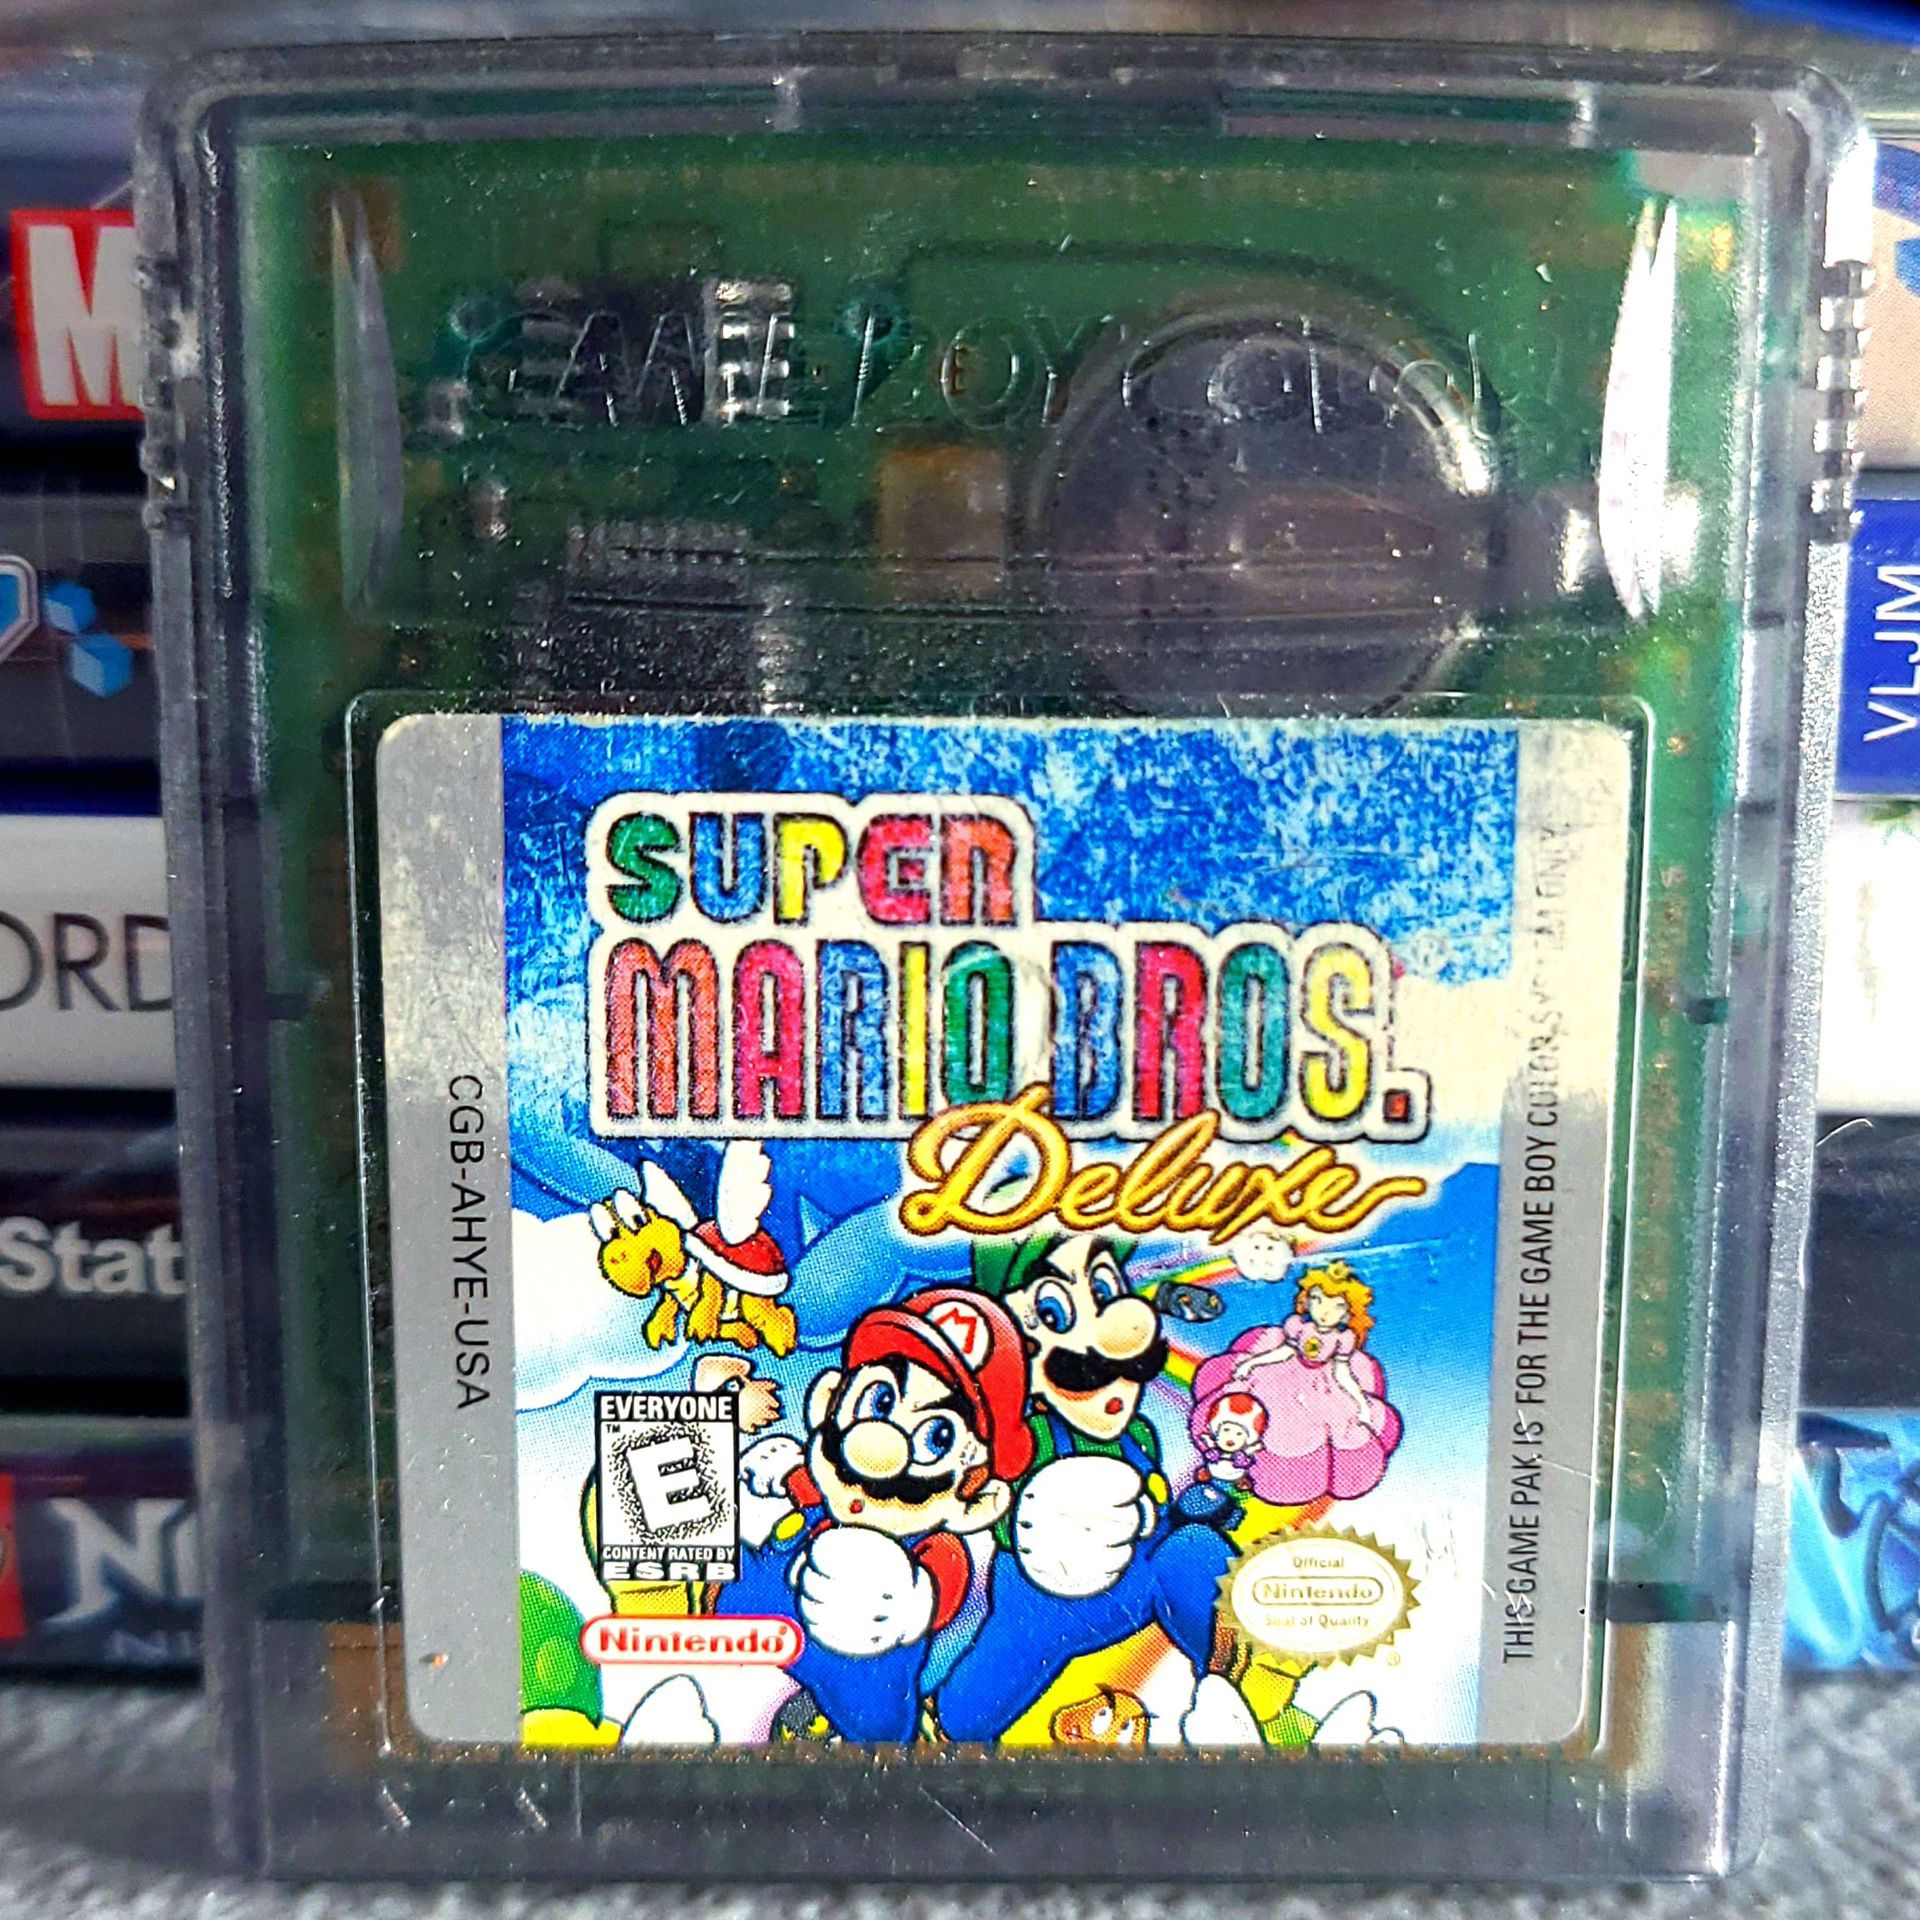 Super Mario Bros. Deluxe In Case (Nintendo Game Boy Color, 1999)  *TRADE IN YOUR OLD GAMES FOR CSH OR CREDIT HERE/WE FIX SYSTEMS